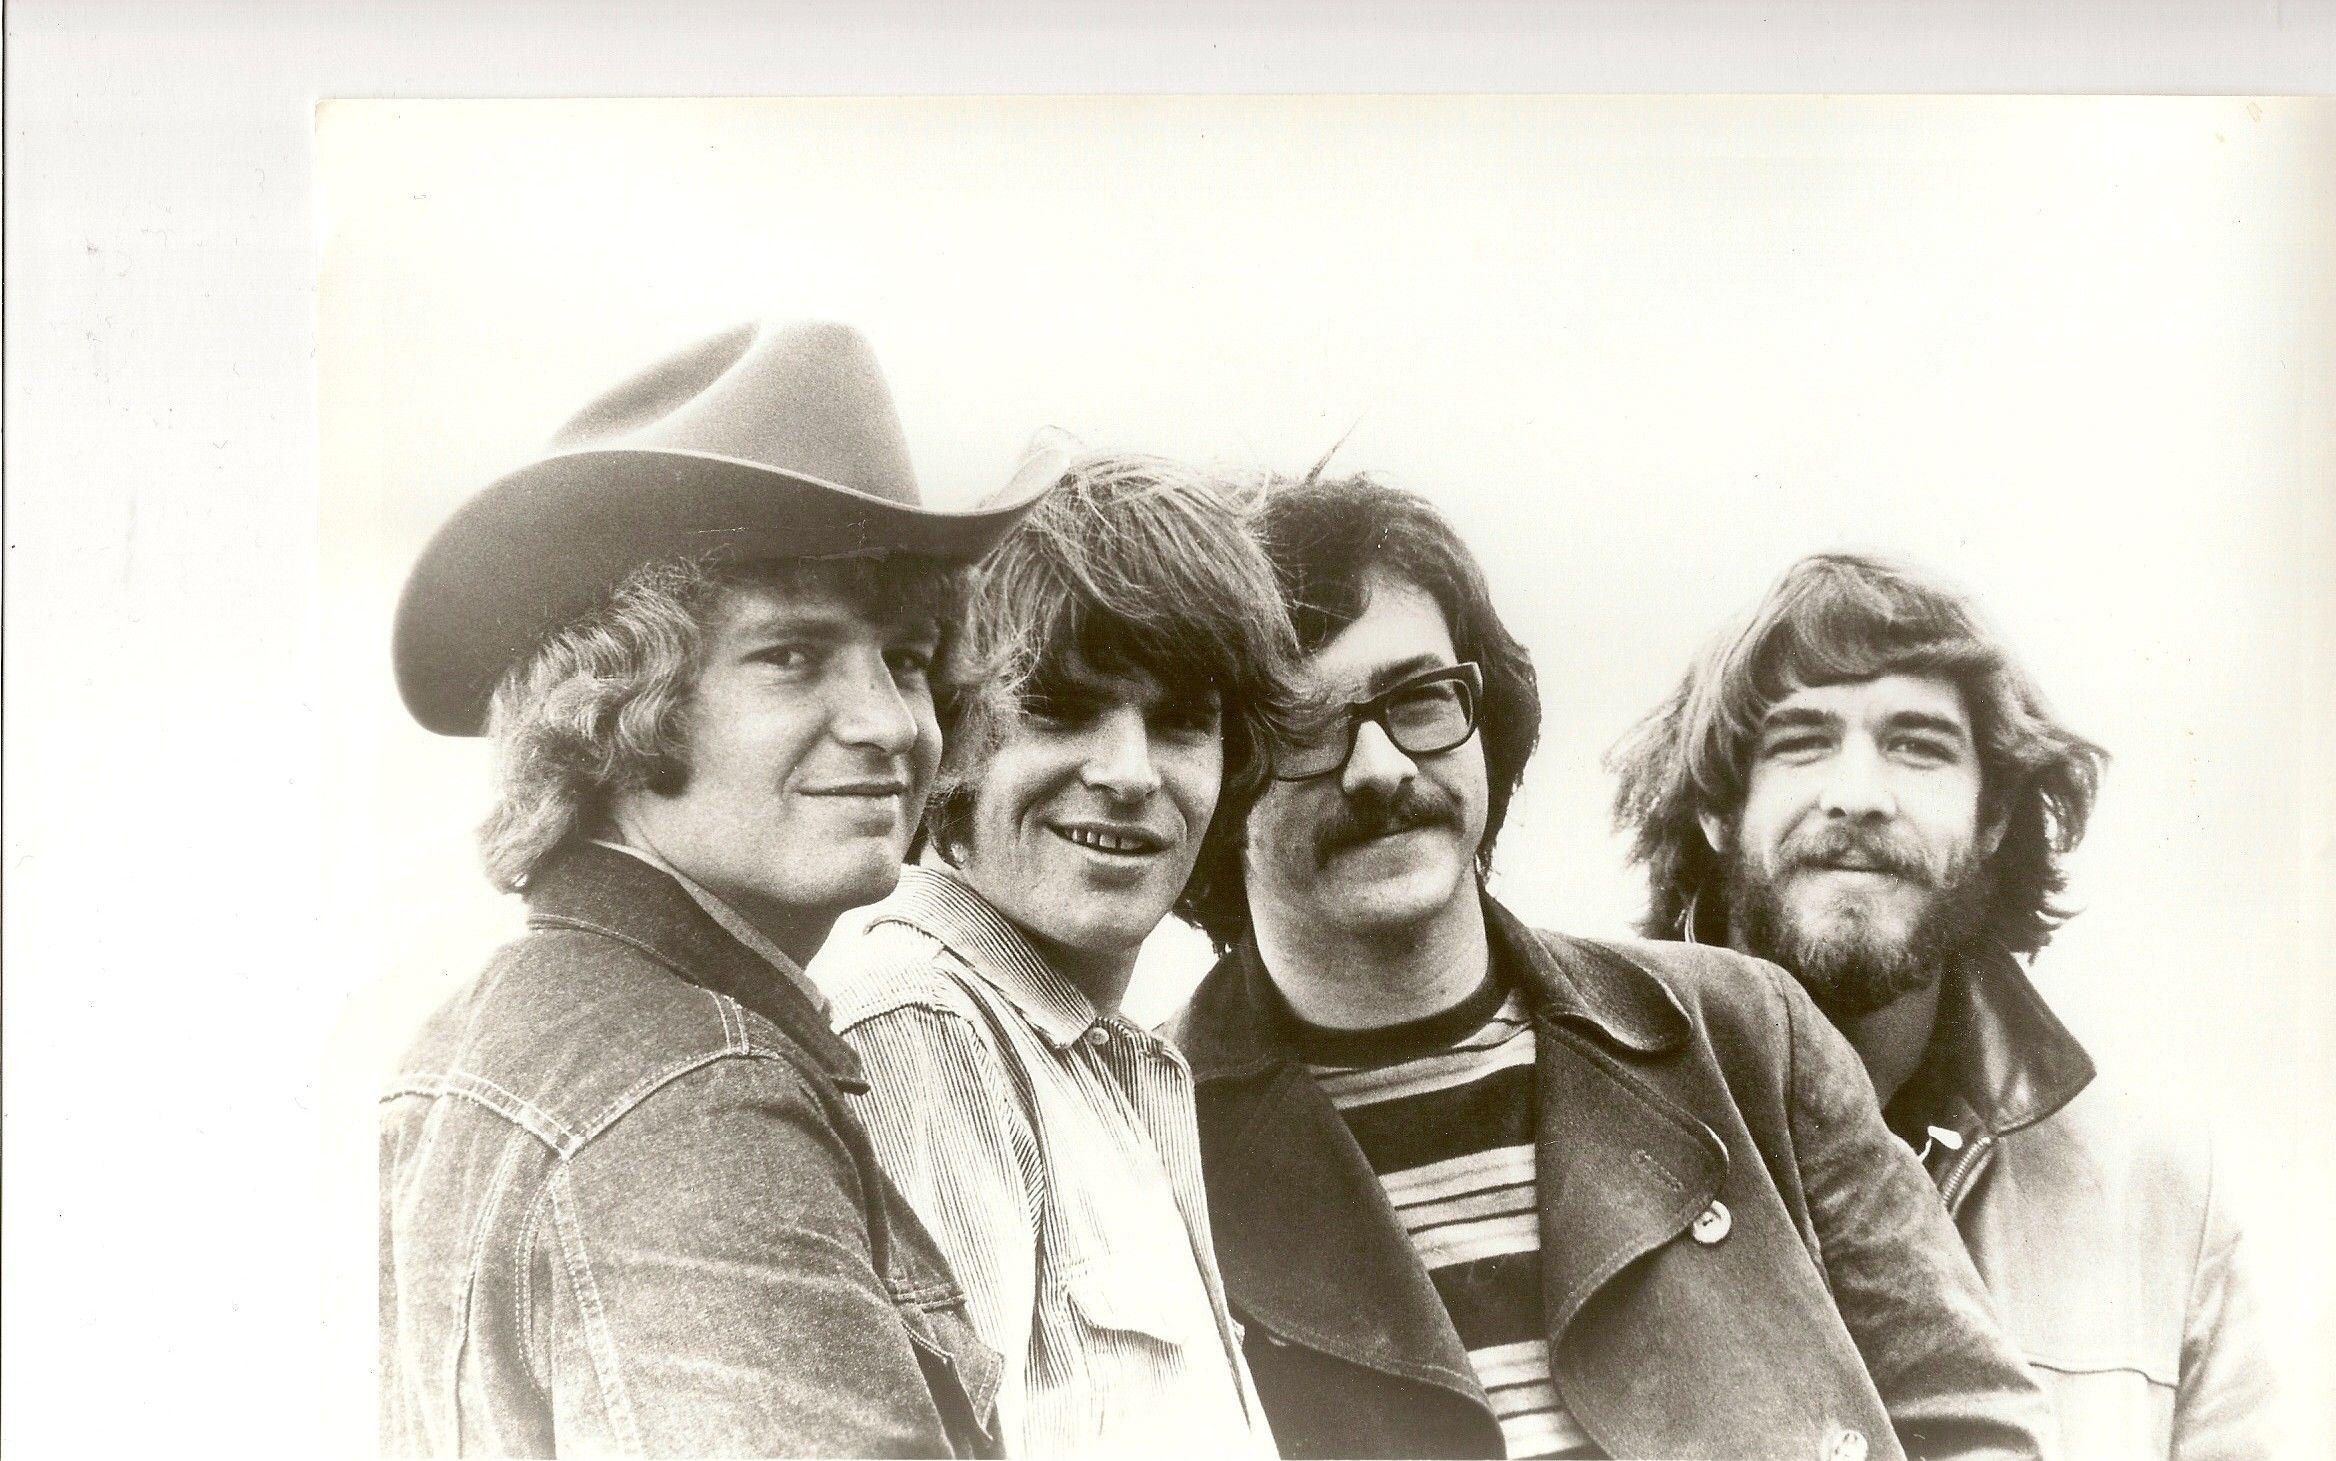 Bill Gaphardt's Creedence Clearwater Revival